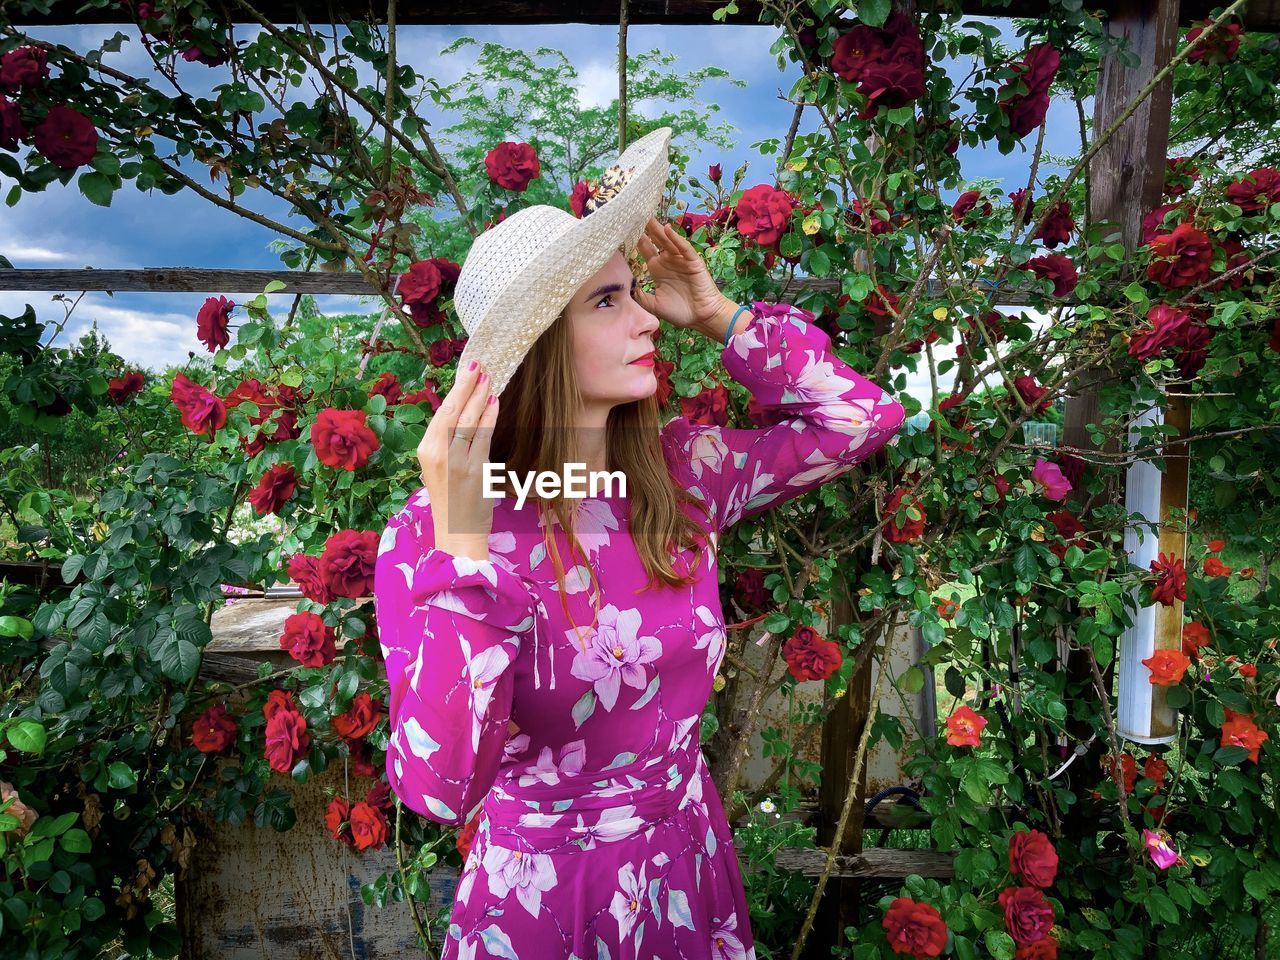 Woman with hat wearing a pink dress in a garden of roses